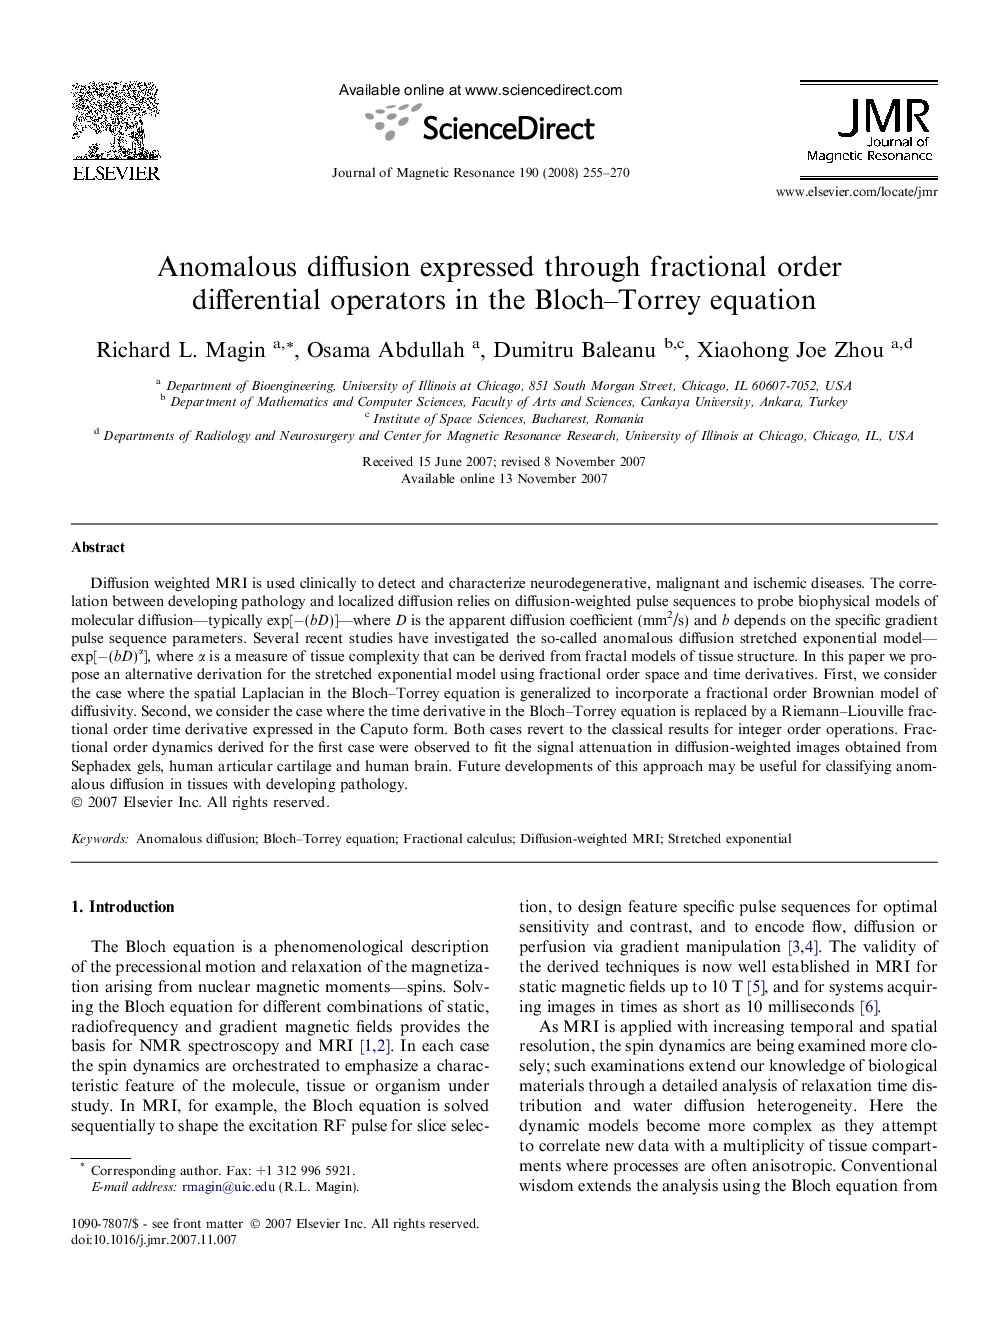 Anomalous diffusion expressed through fractional order differential operators in the Bloch-Torrey equation